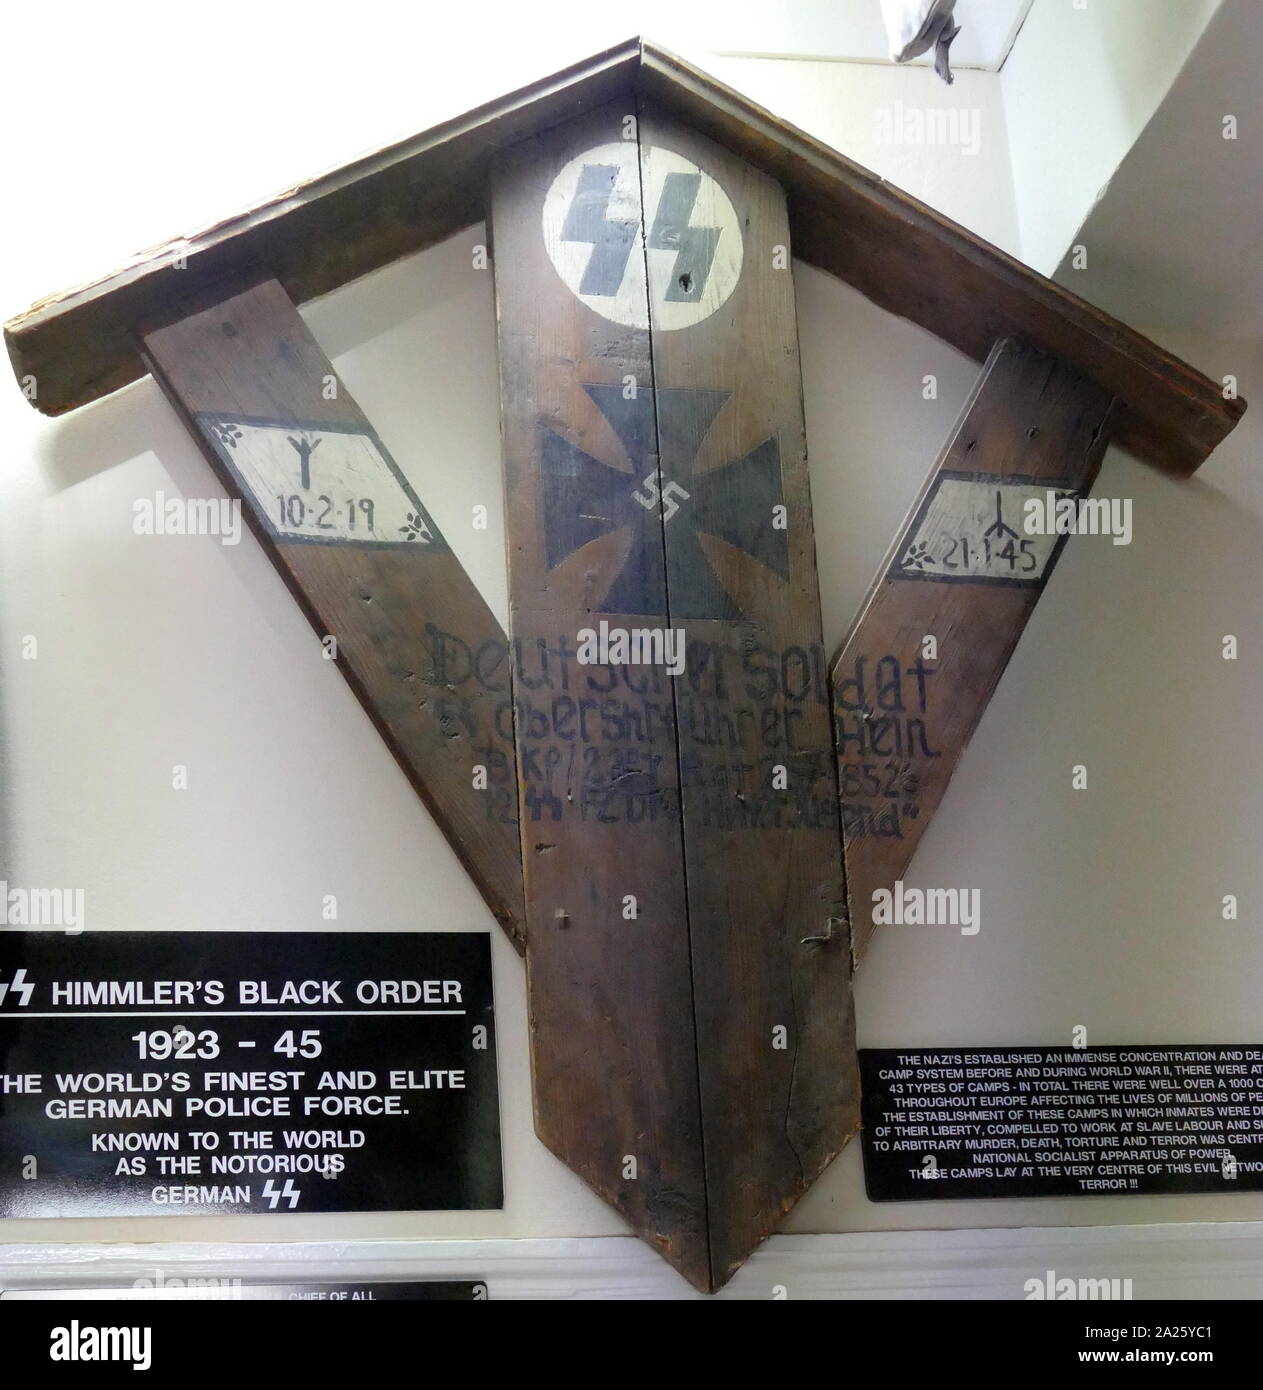 A wooden burial marker for a German SS soldier. The SS was a major paramilitary organization under Adolf Hitler and the Nazi Party. Stock Photo